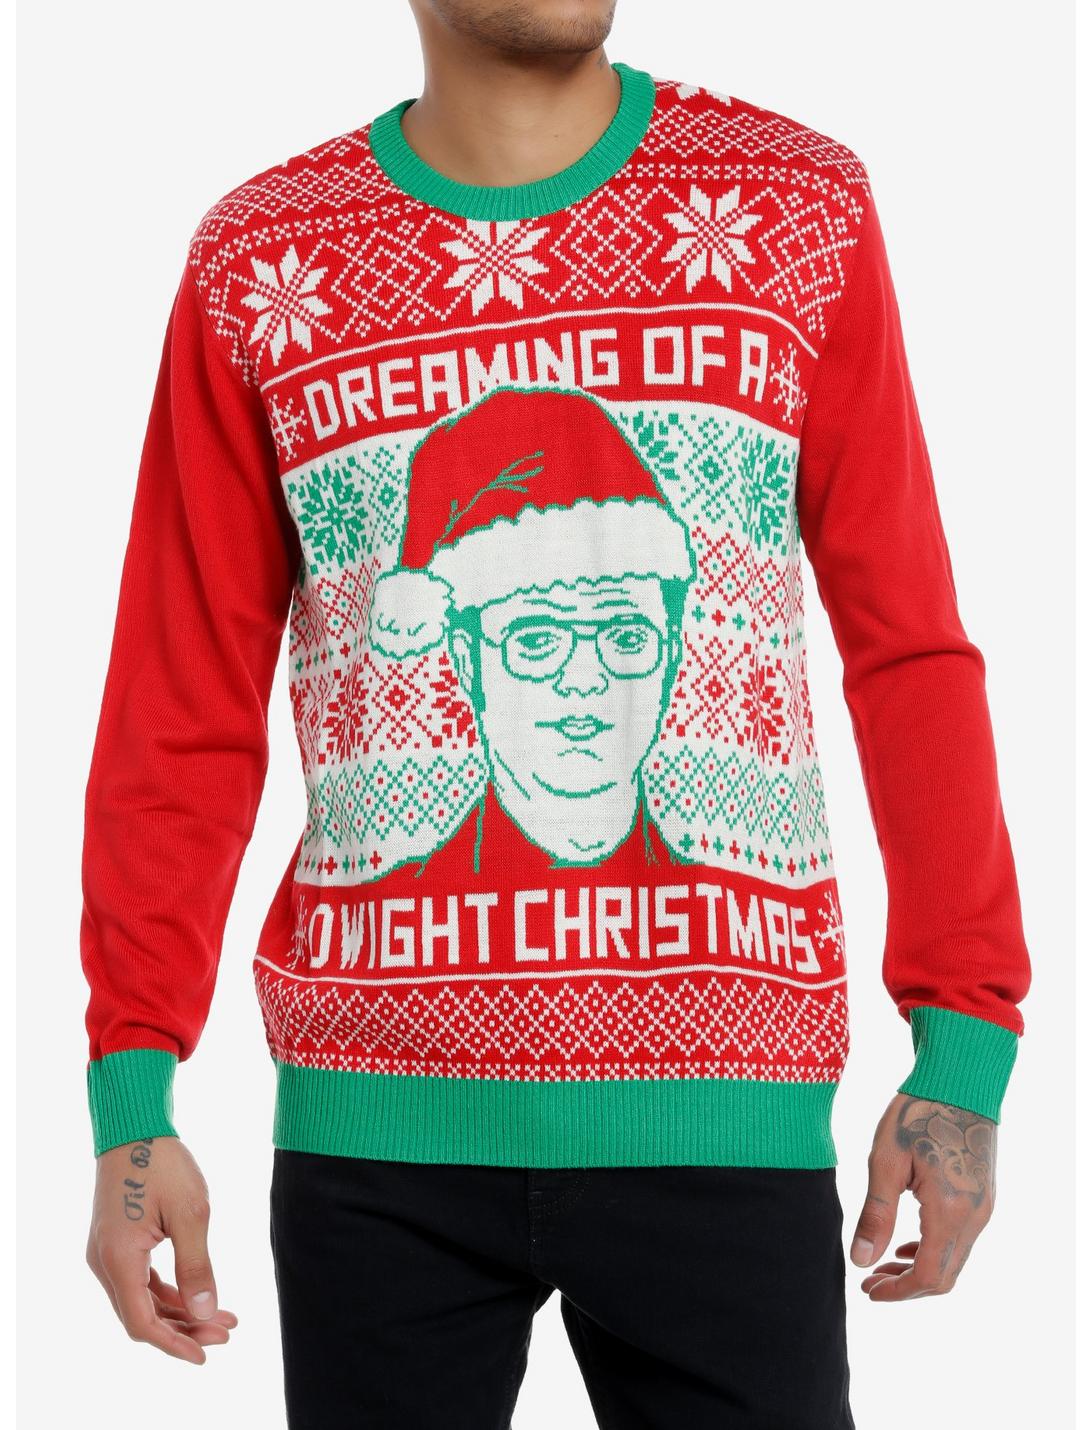 The Office Dreaming Of A Dwight Christmas Intarsia Sweater, MULTI, hi-res